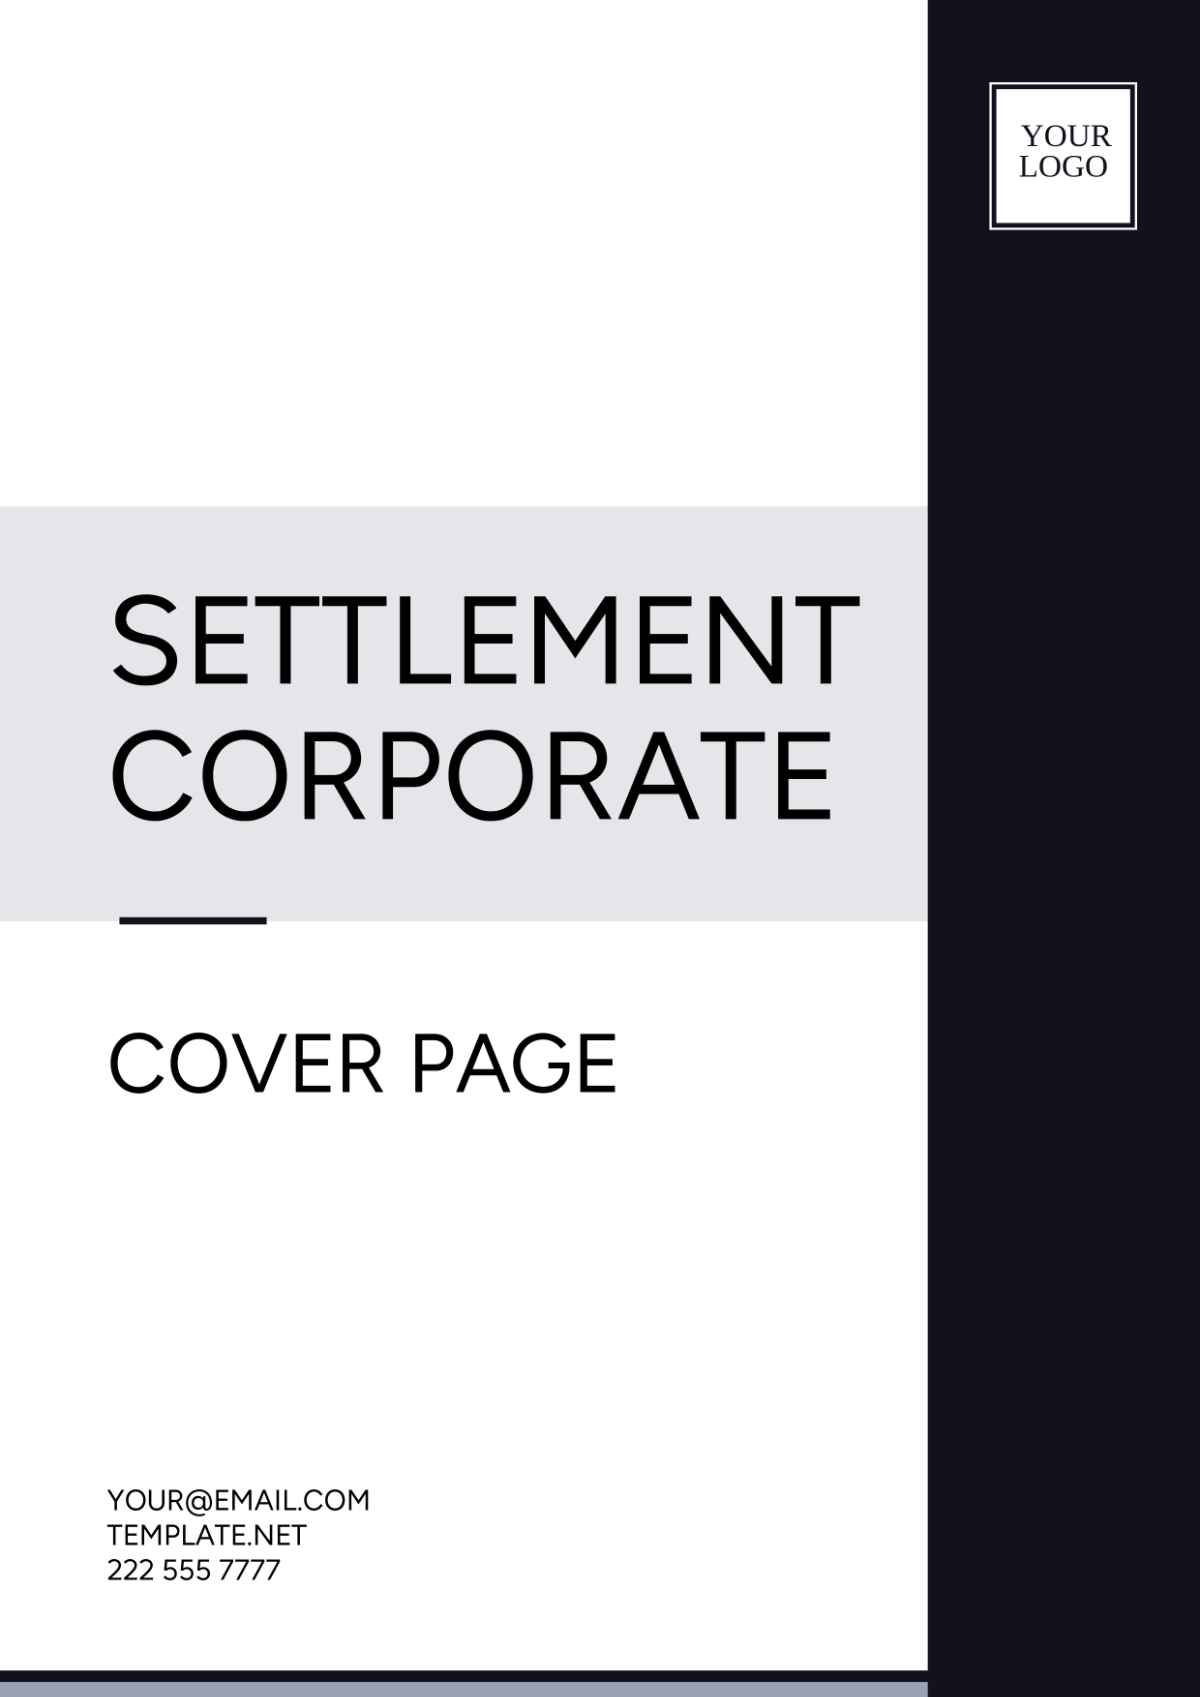 Free Settlement Corporate Cover Page Template